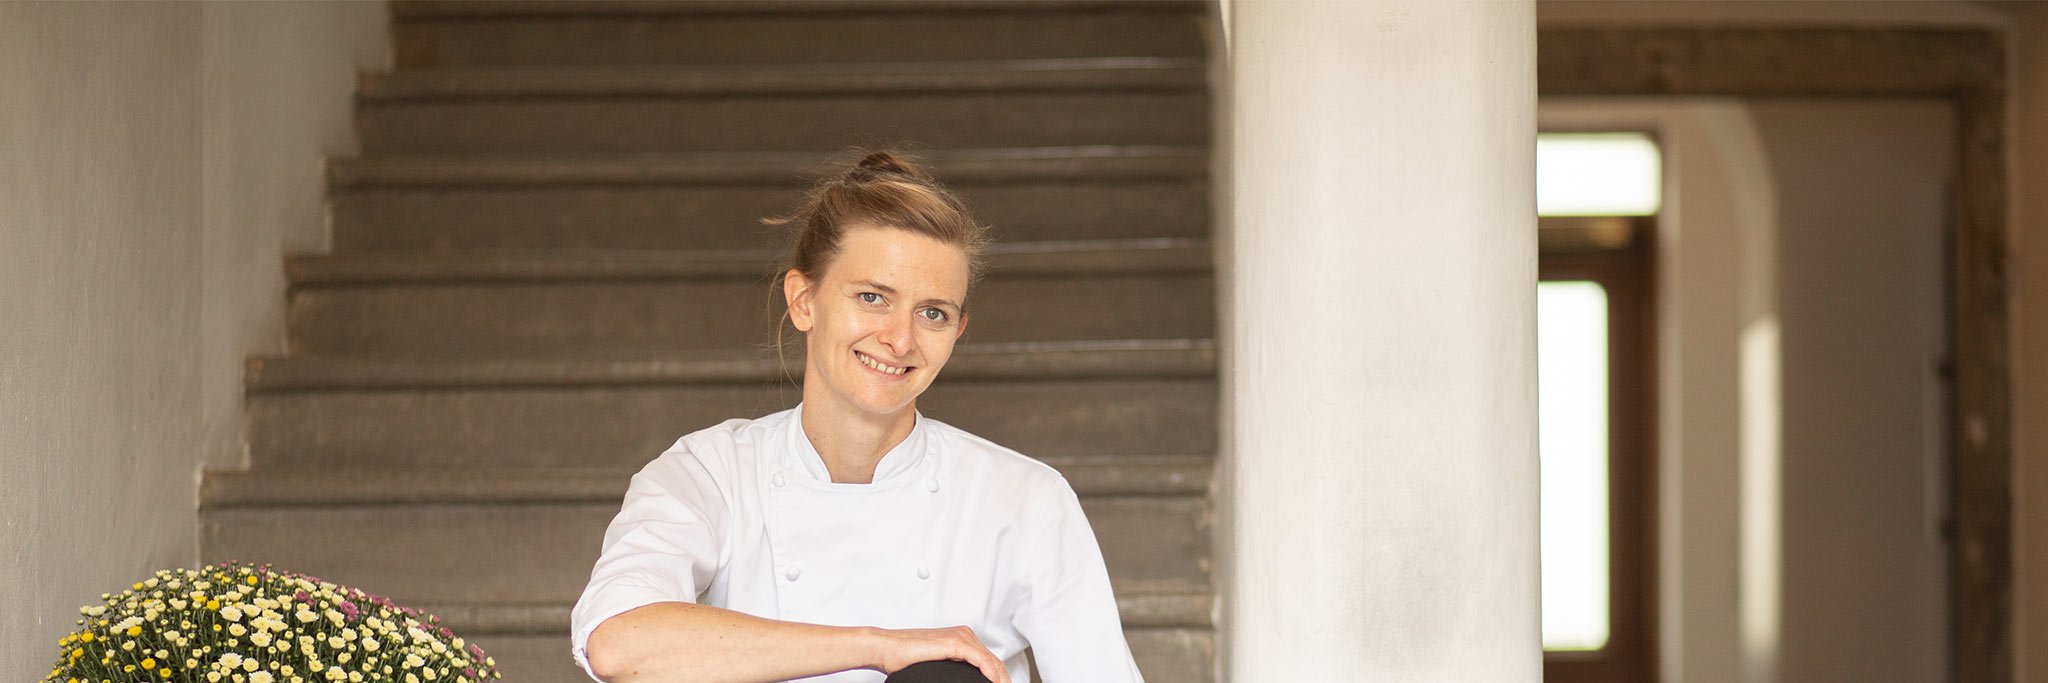 Top chef Theresia Palmetzhofer is also actively involved in training young talent, in order to promote the future of gastronomy.